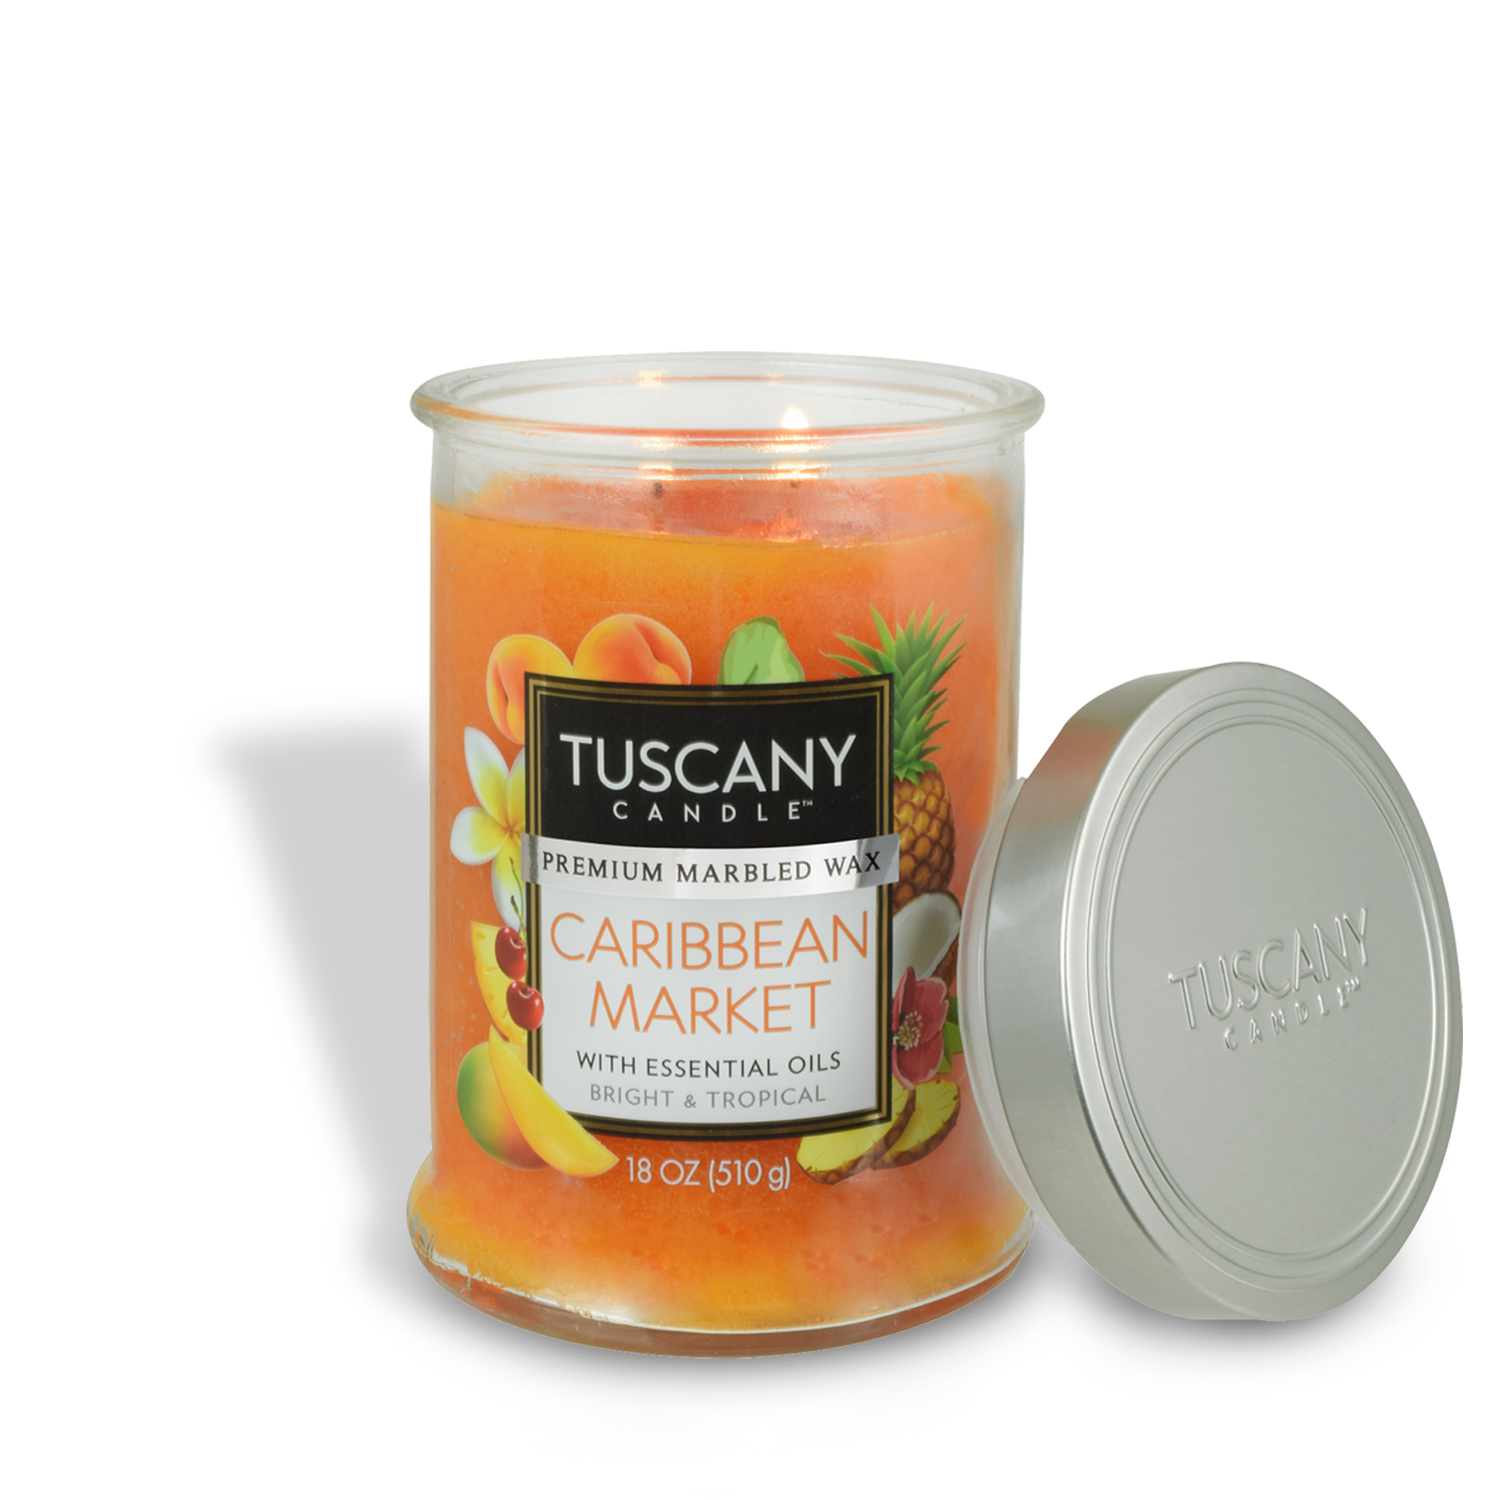 Tuscany Candle Caribbean Market Long-Lasting Scented Jar Candle (18 oz) with tropical fruits aroma.